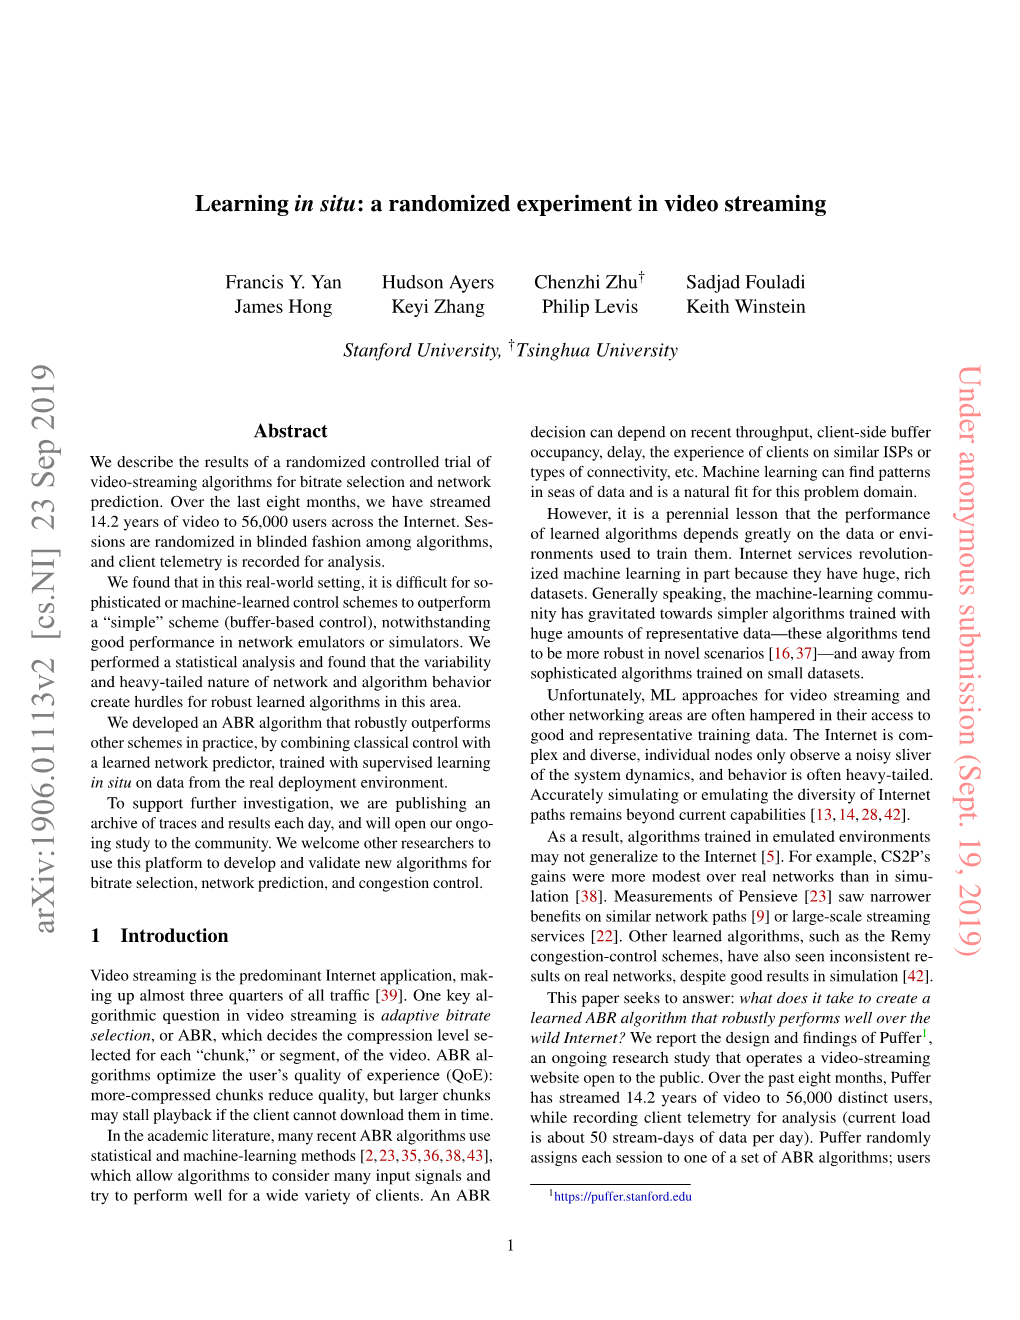 Learning in Situ: a Randomized Experiment in Video Streaming